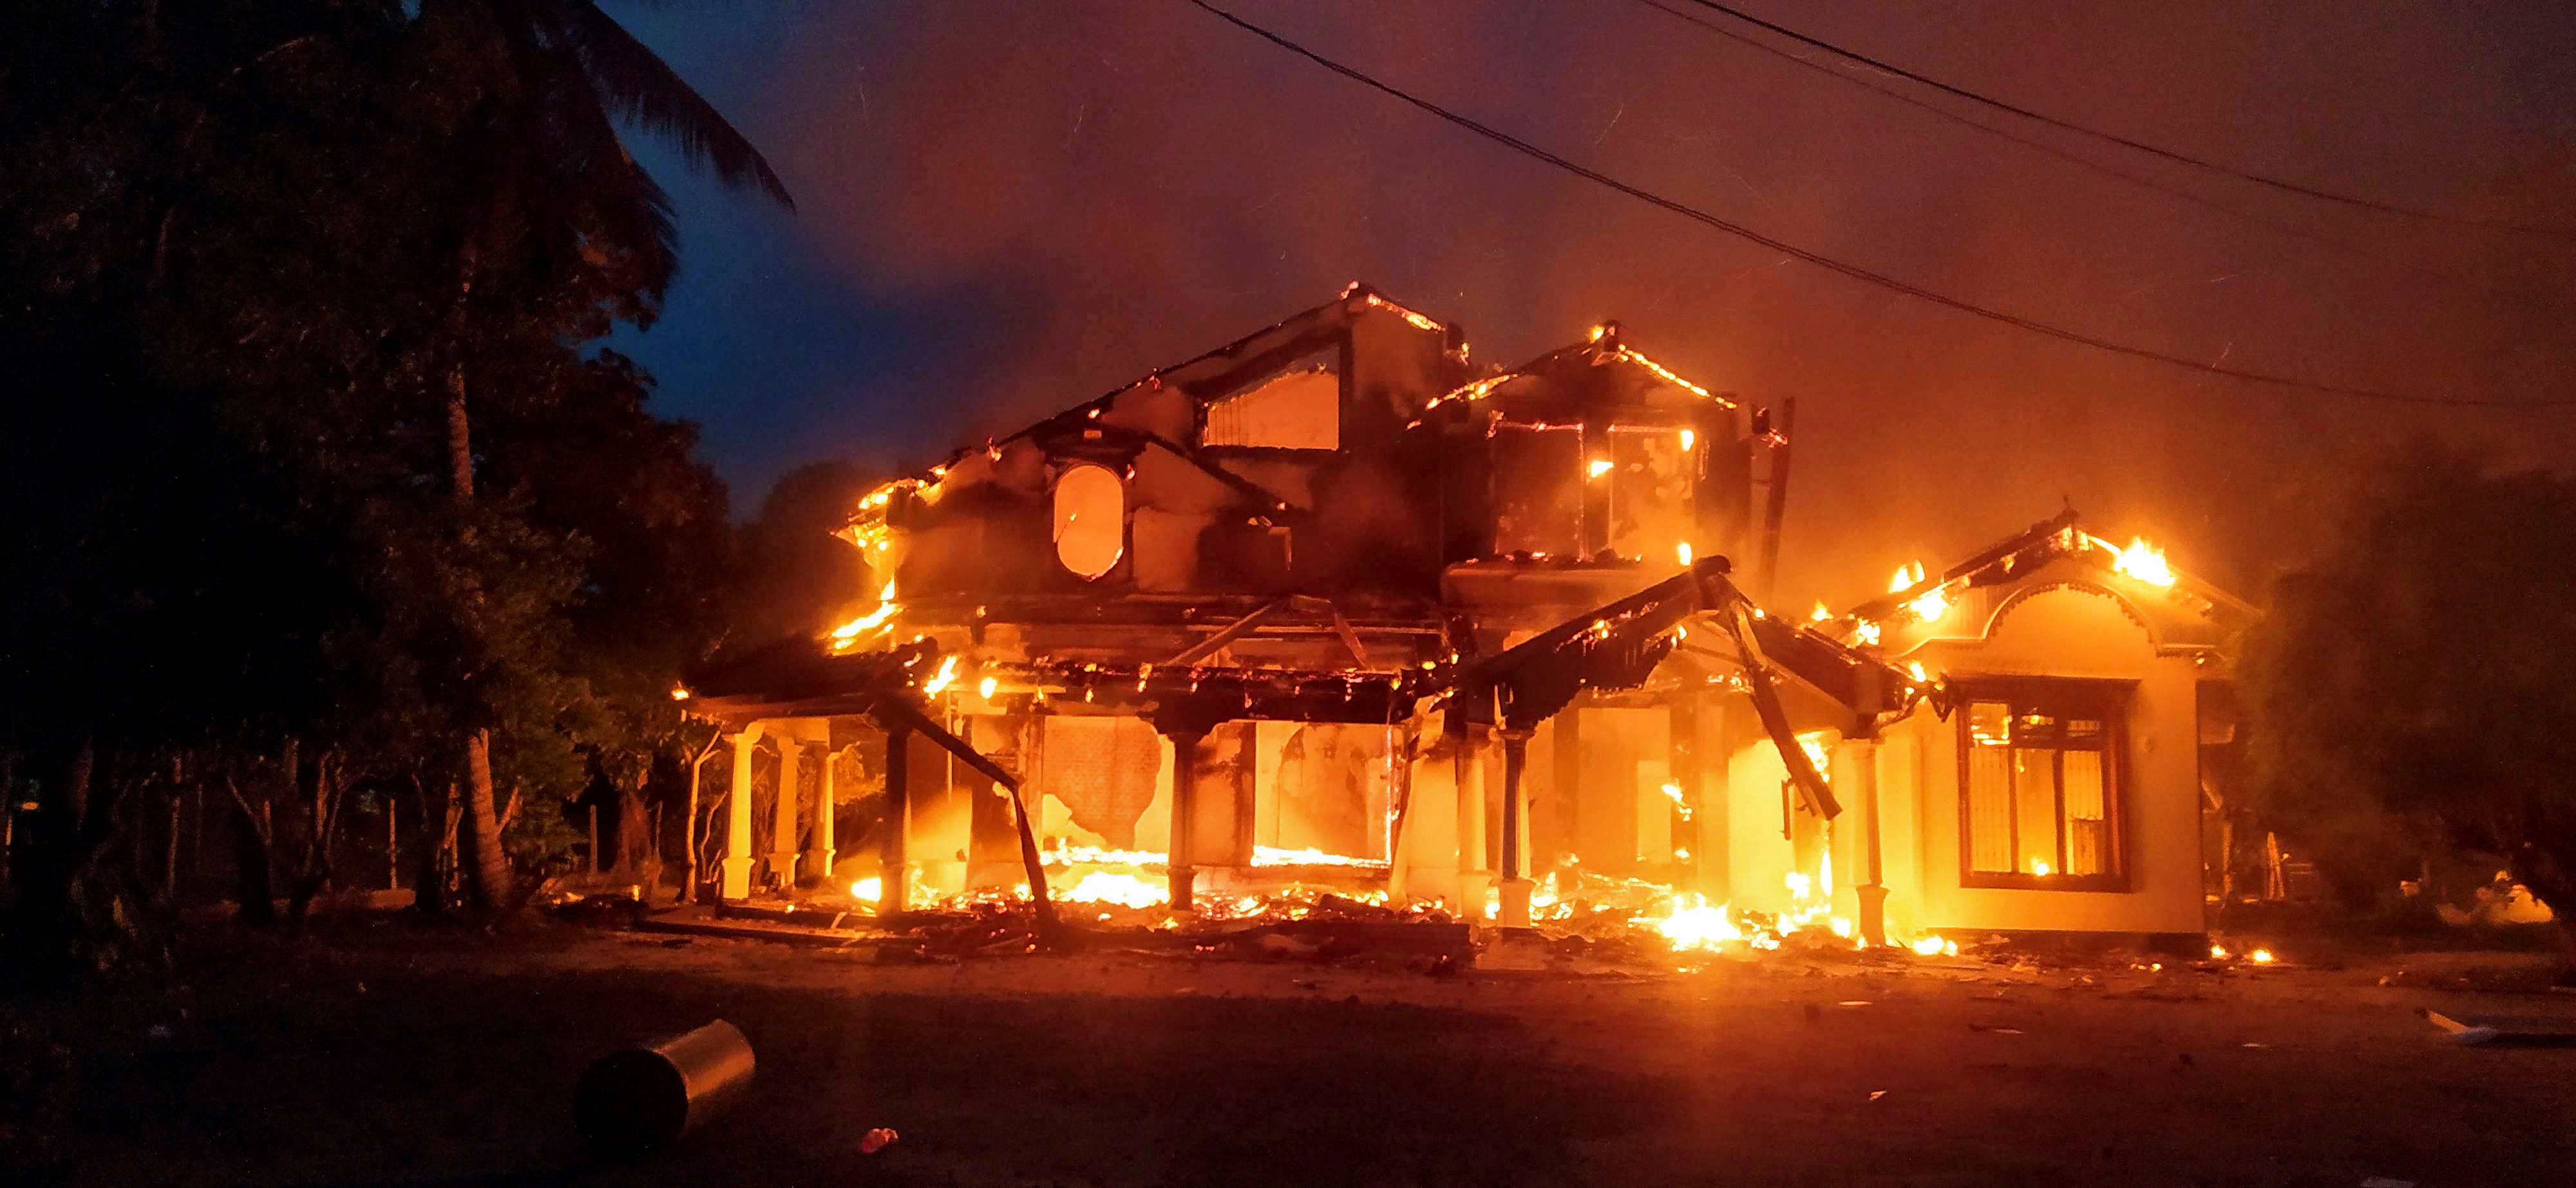 Lankan PM quits, Rajapaksas' family house set afire; army out